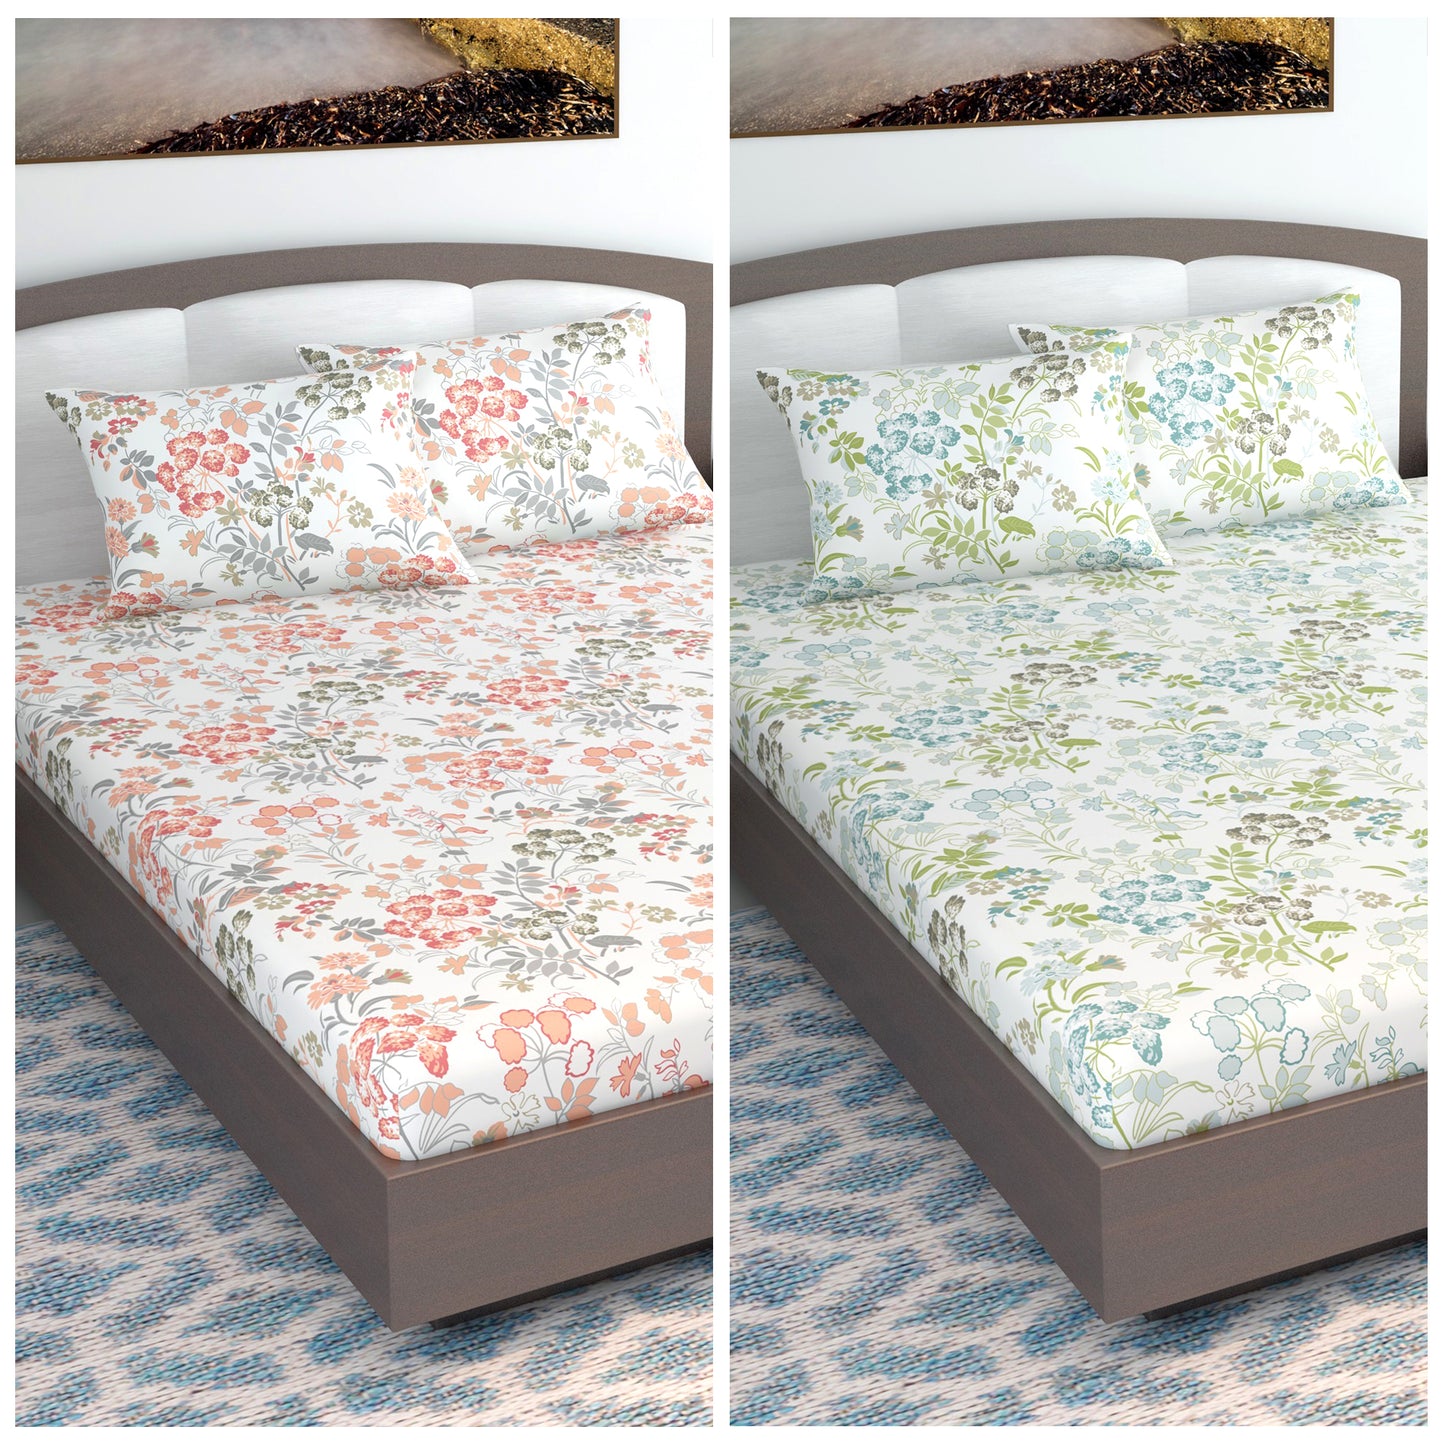 Vintage Floral Peach and Green Set of 2 Combo Bedsheet for King Size Bed